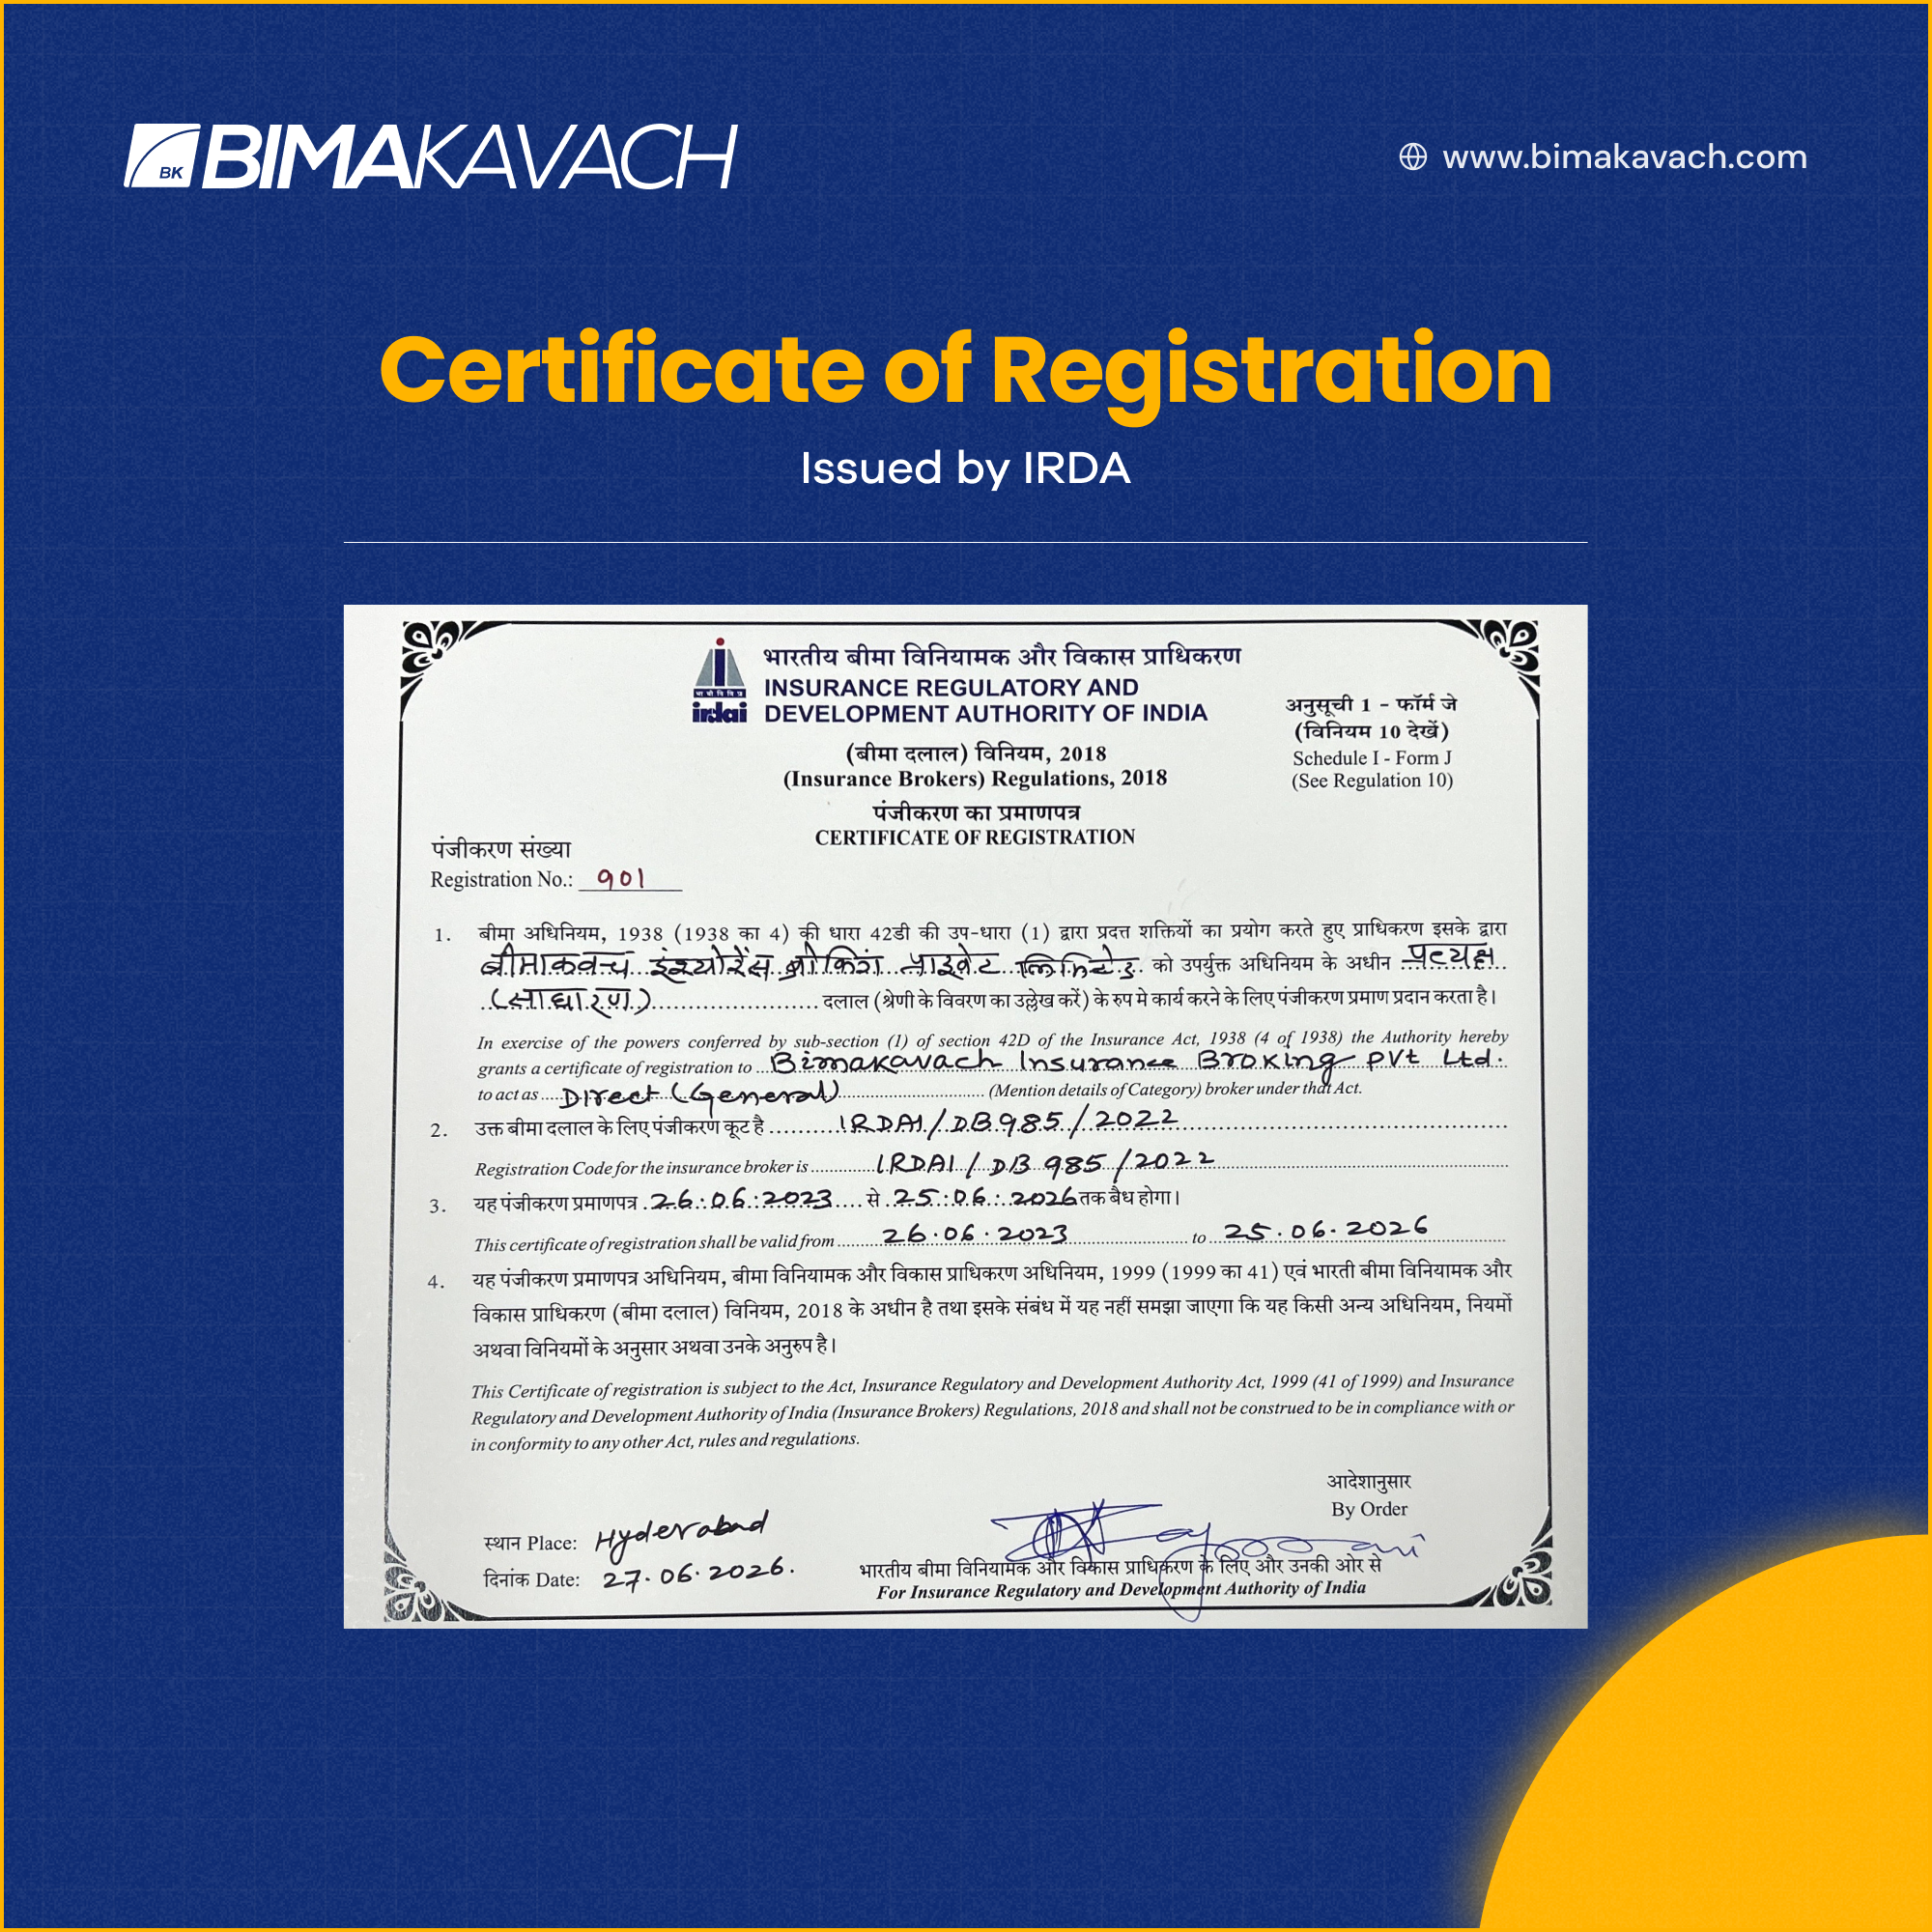 Certificate of Registration Issued by IRDA